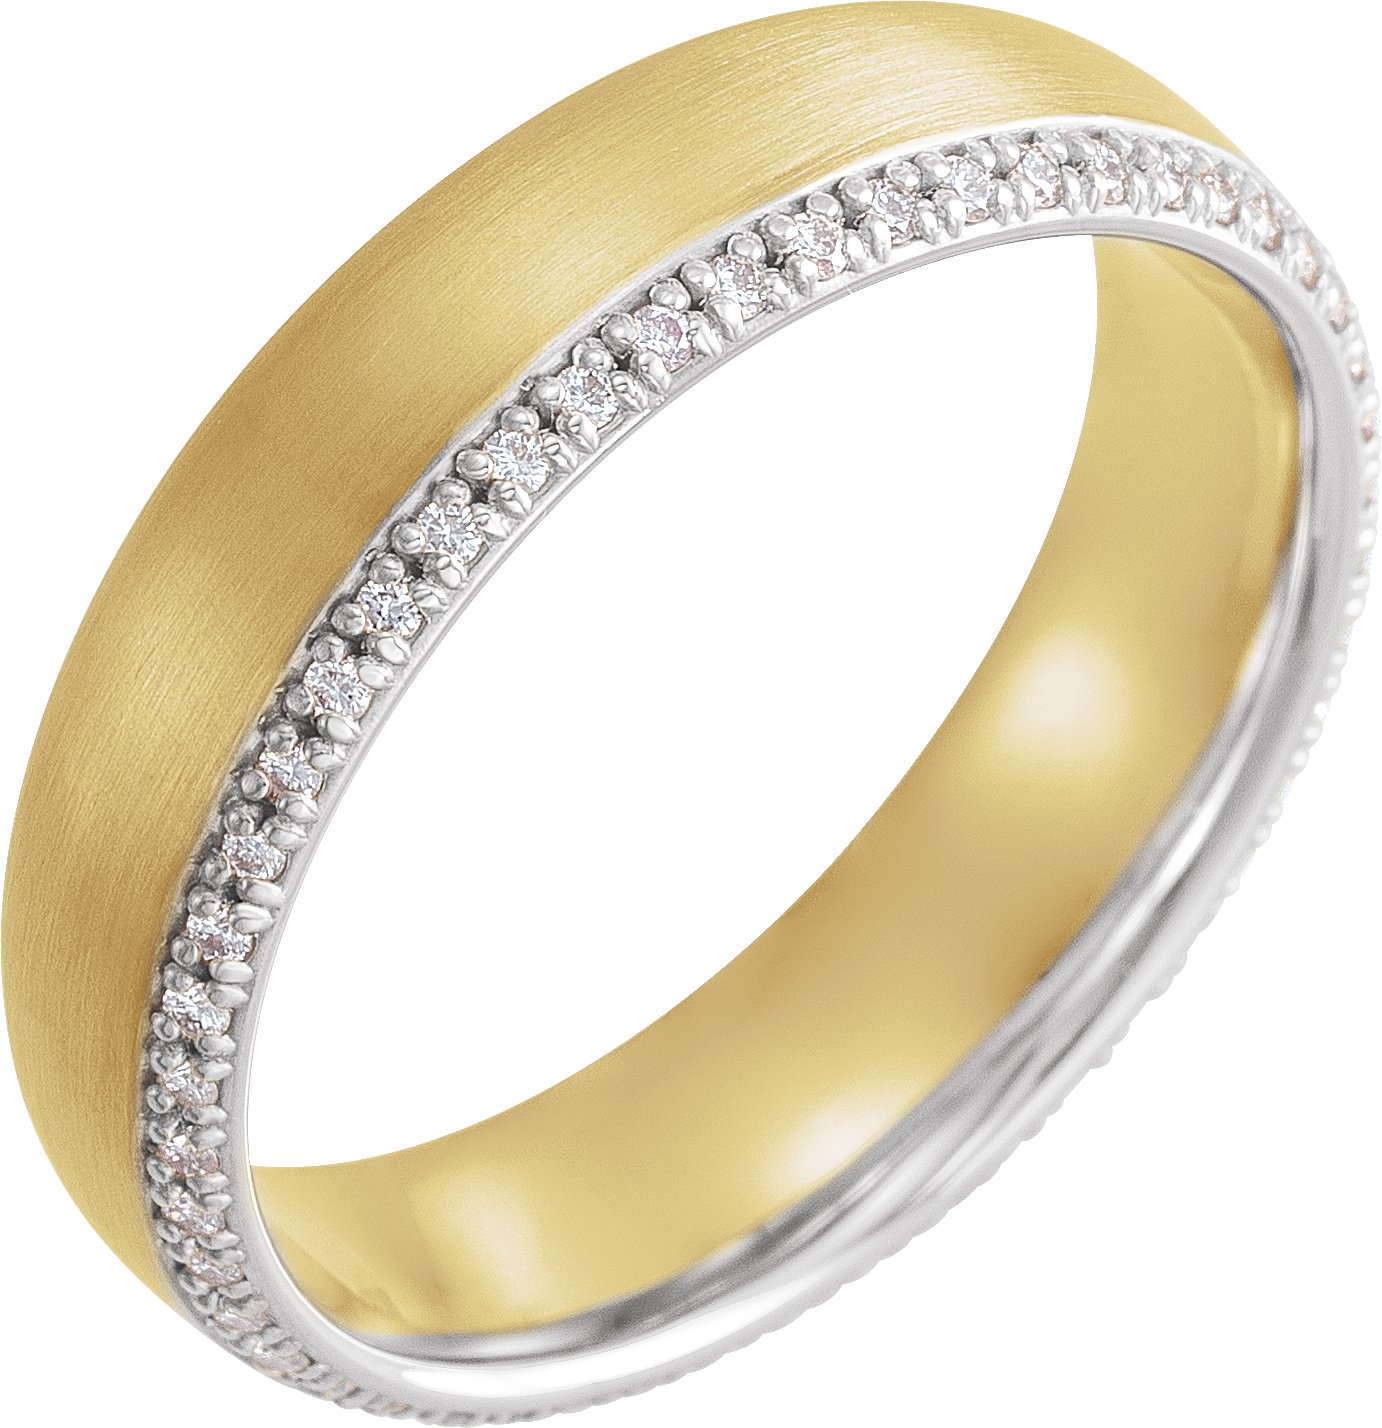 14K Yellow and White 6 mm .25 CTW Diamond Band Size 11 Ref 10167791